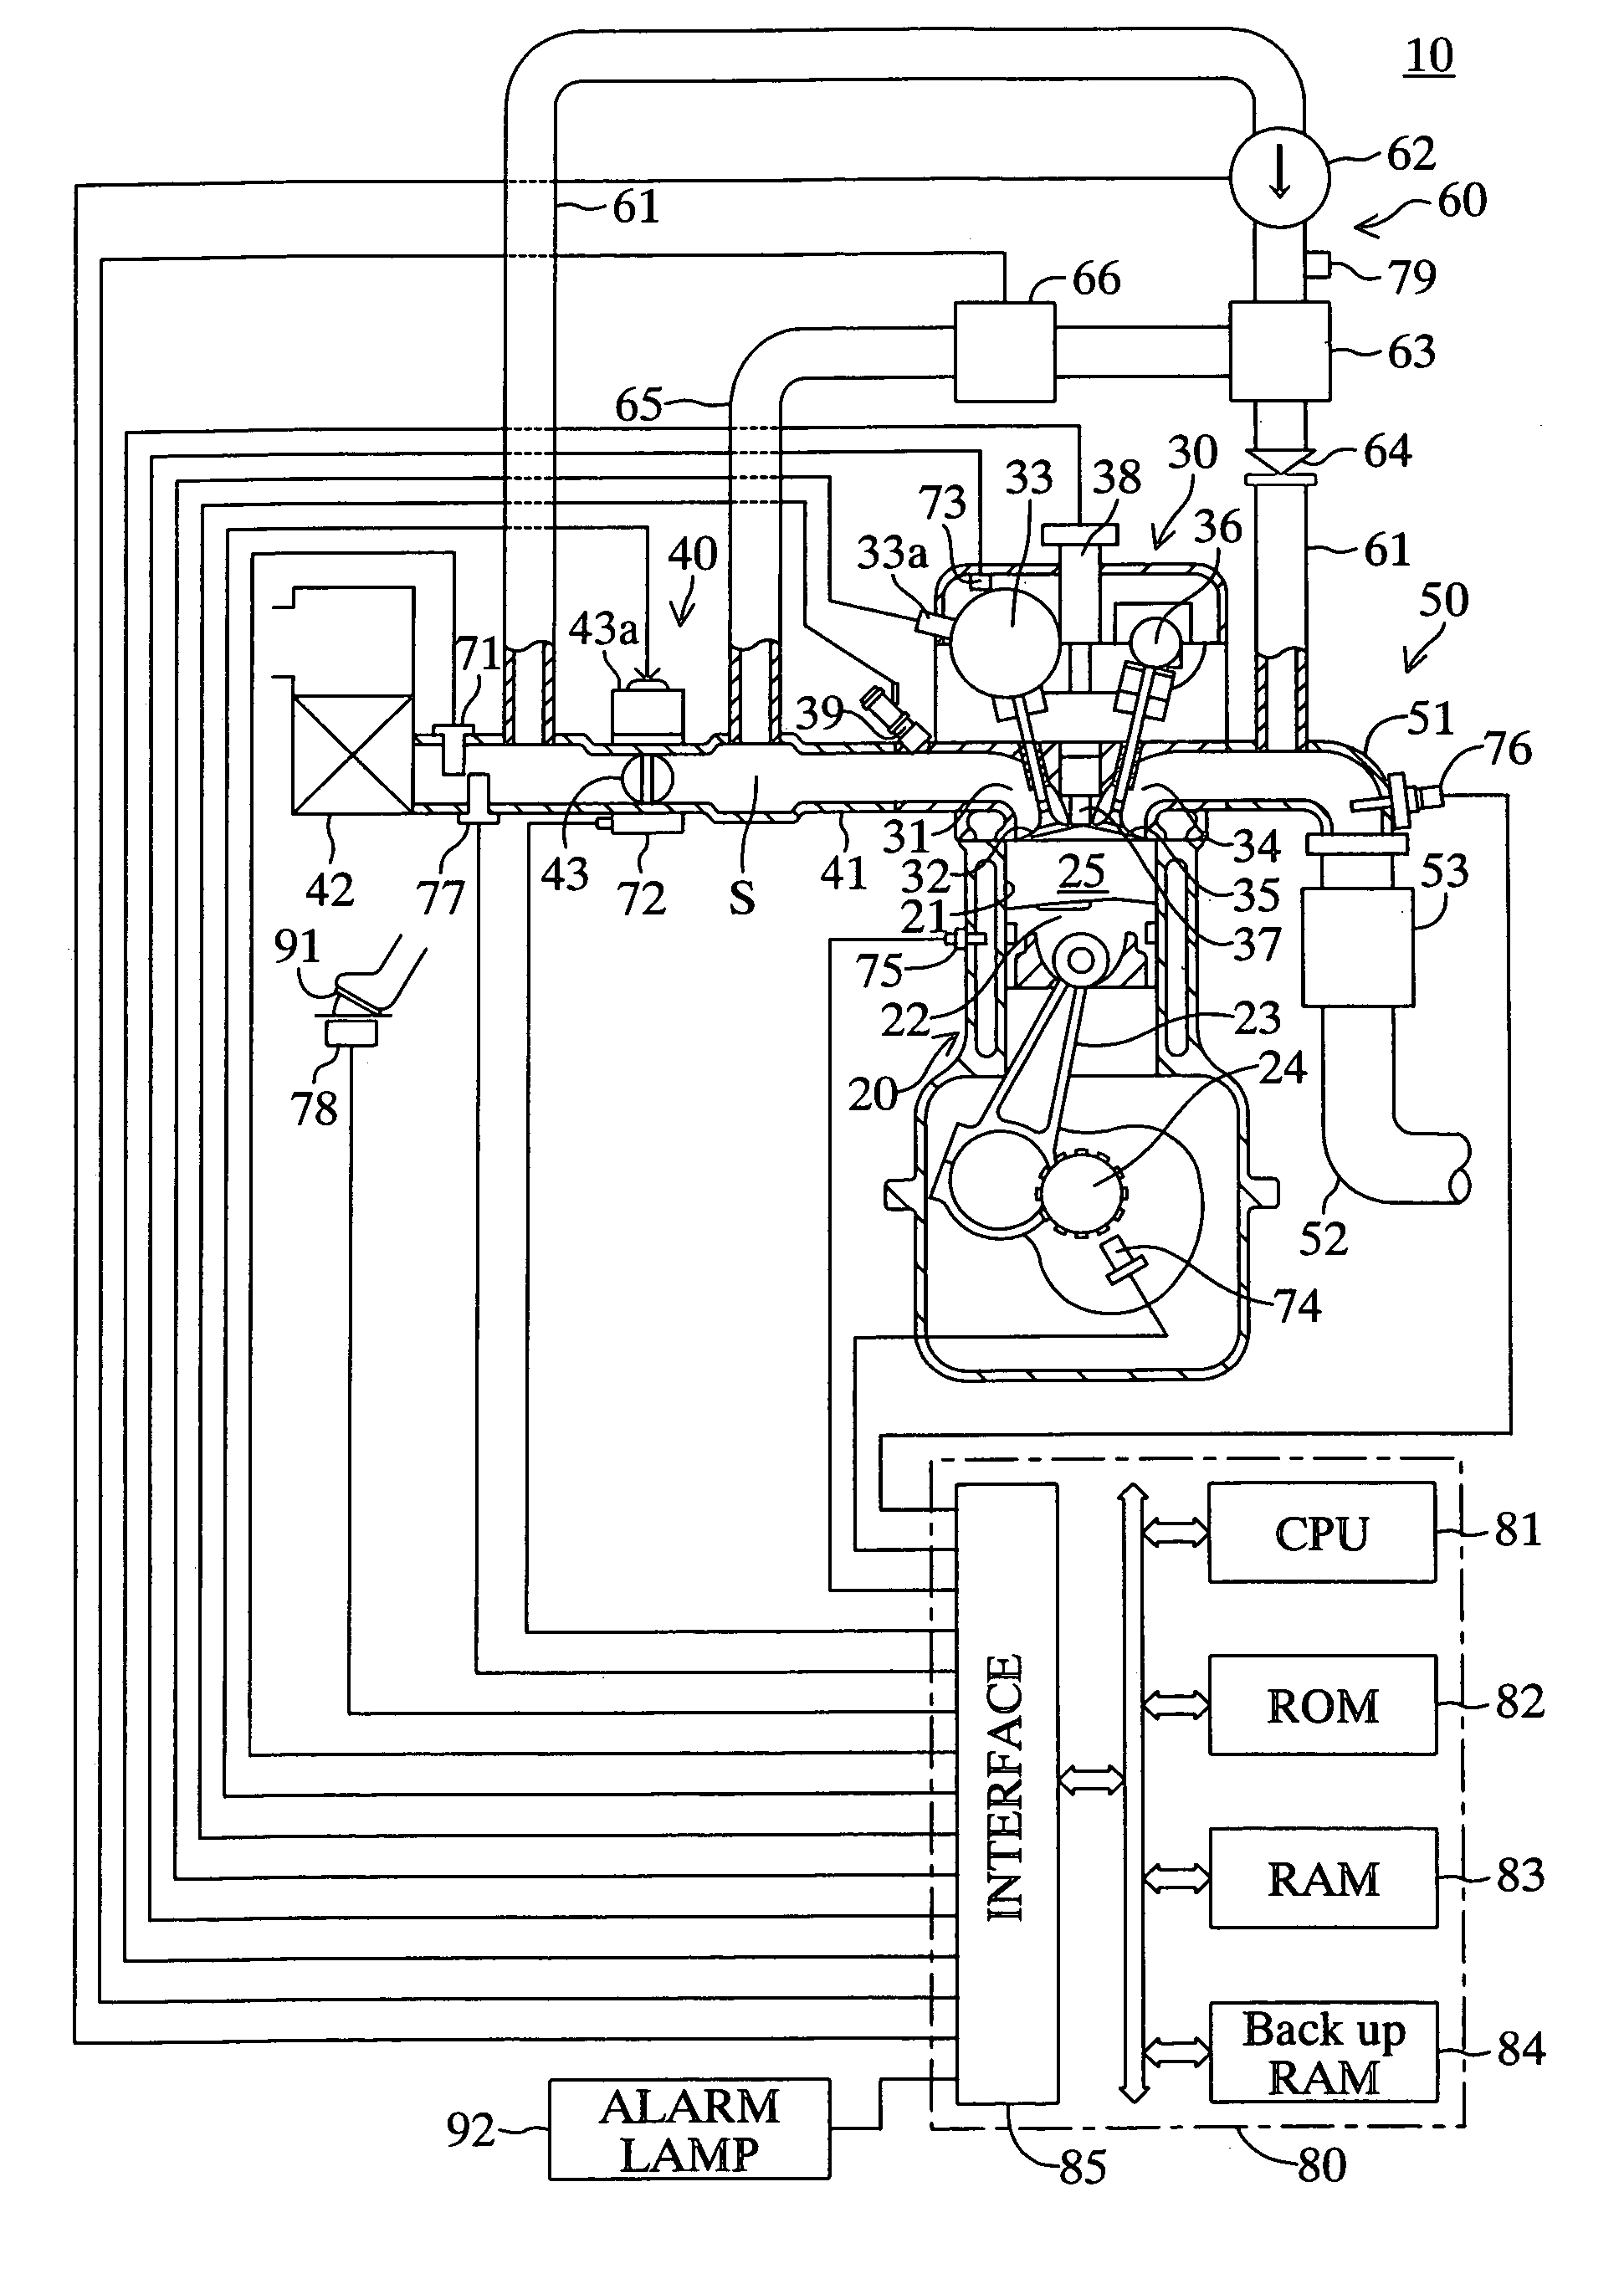 Anomaly judgment apparatus for secondary air supply system